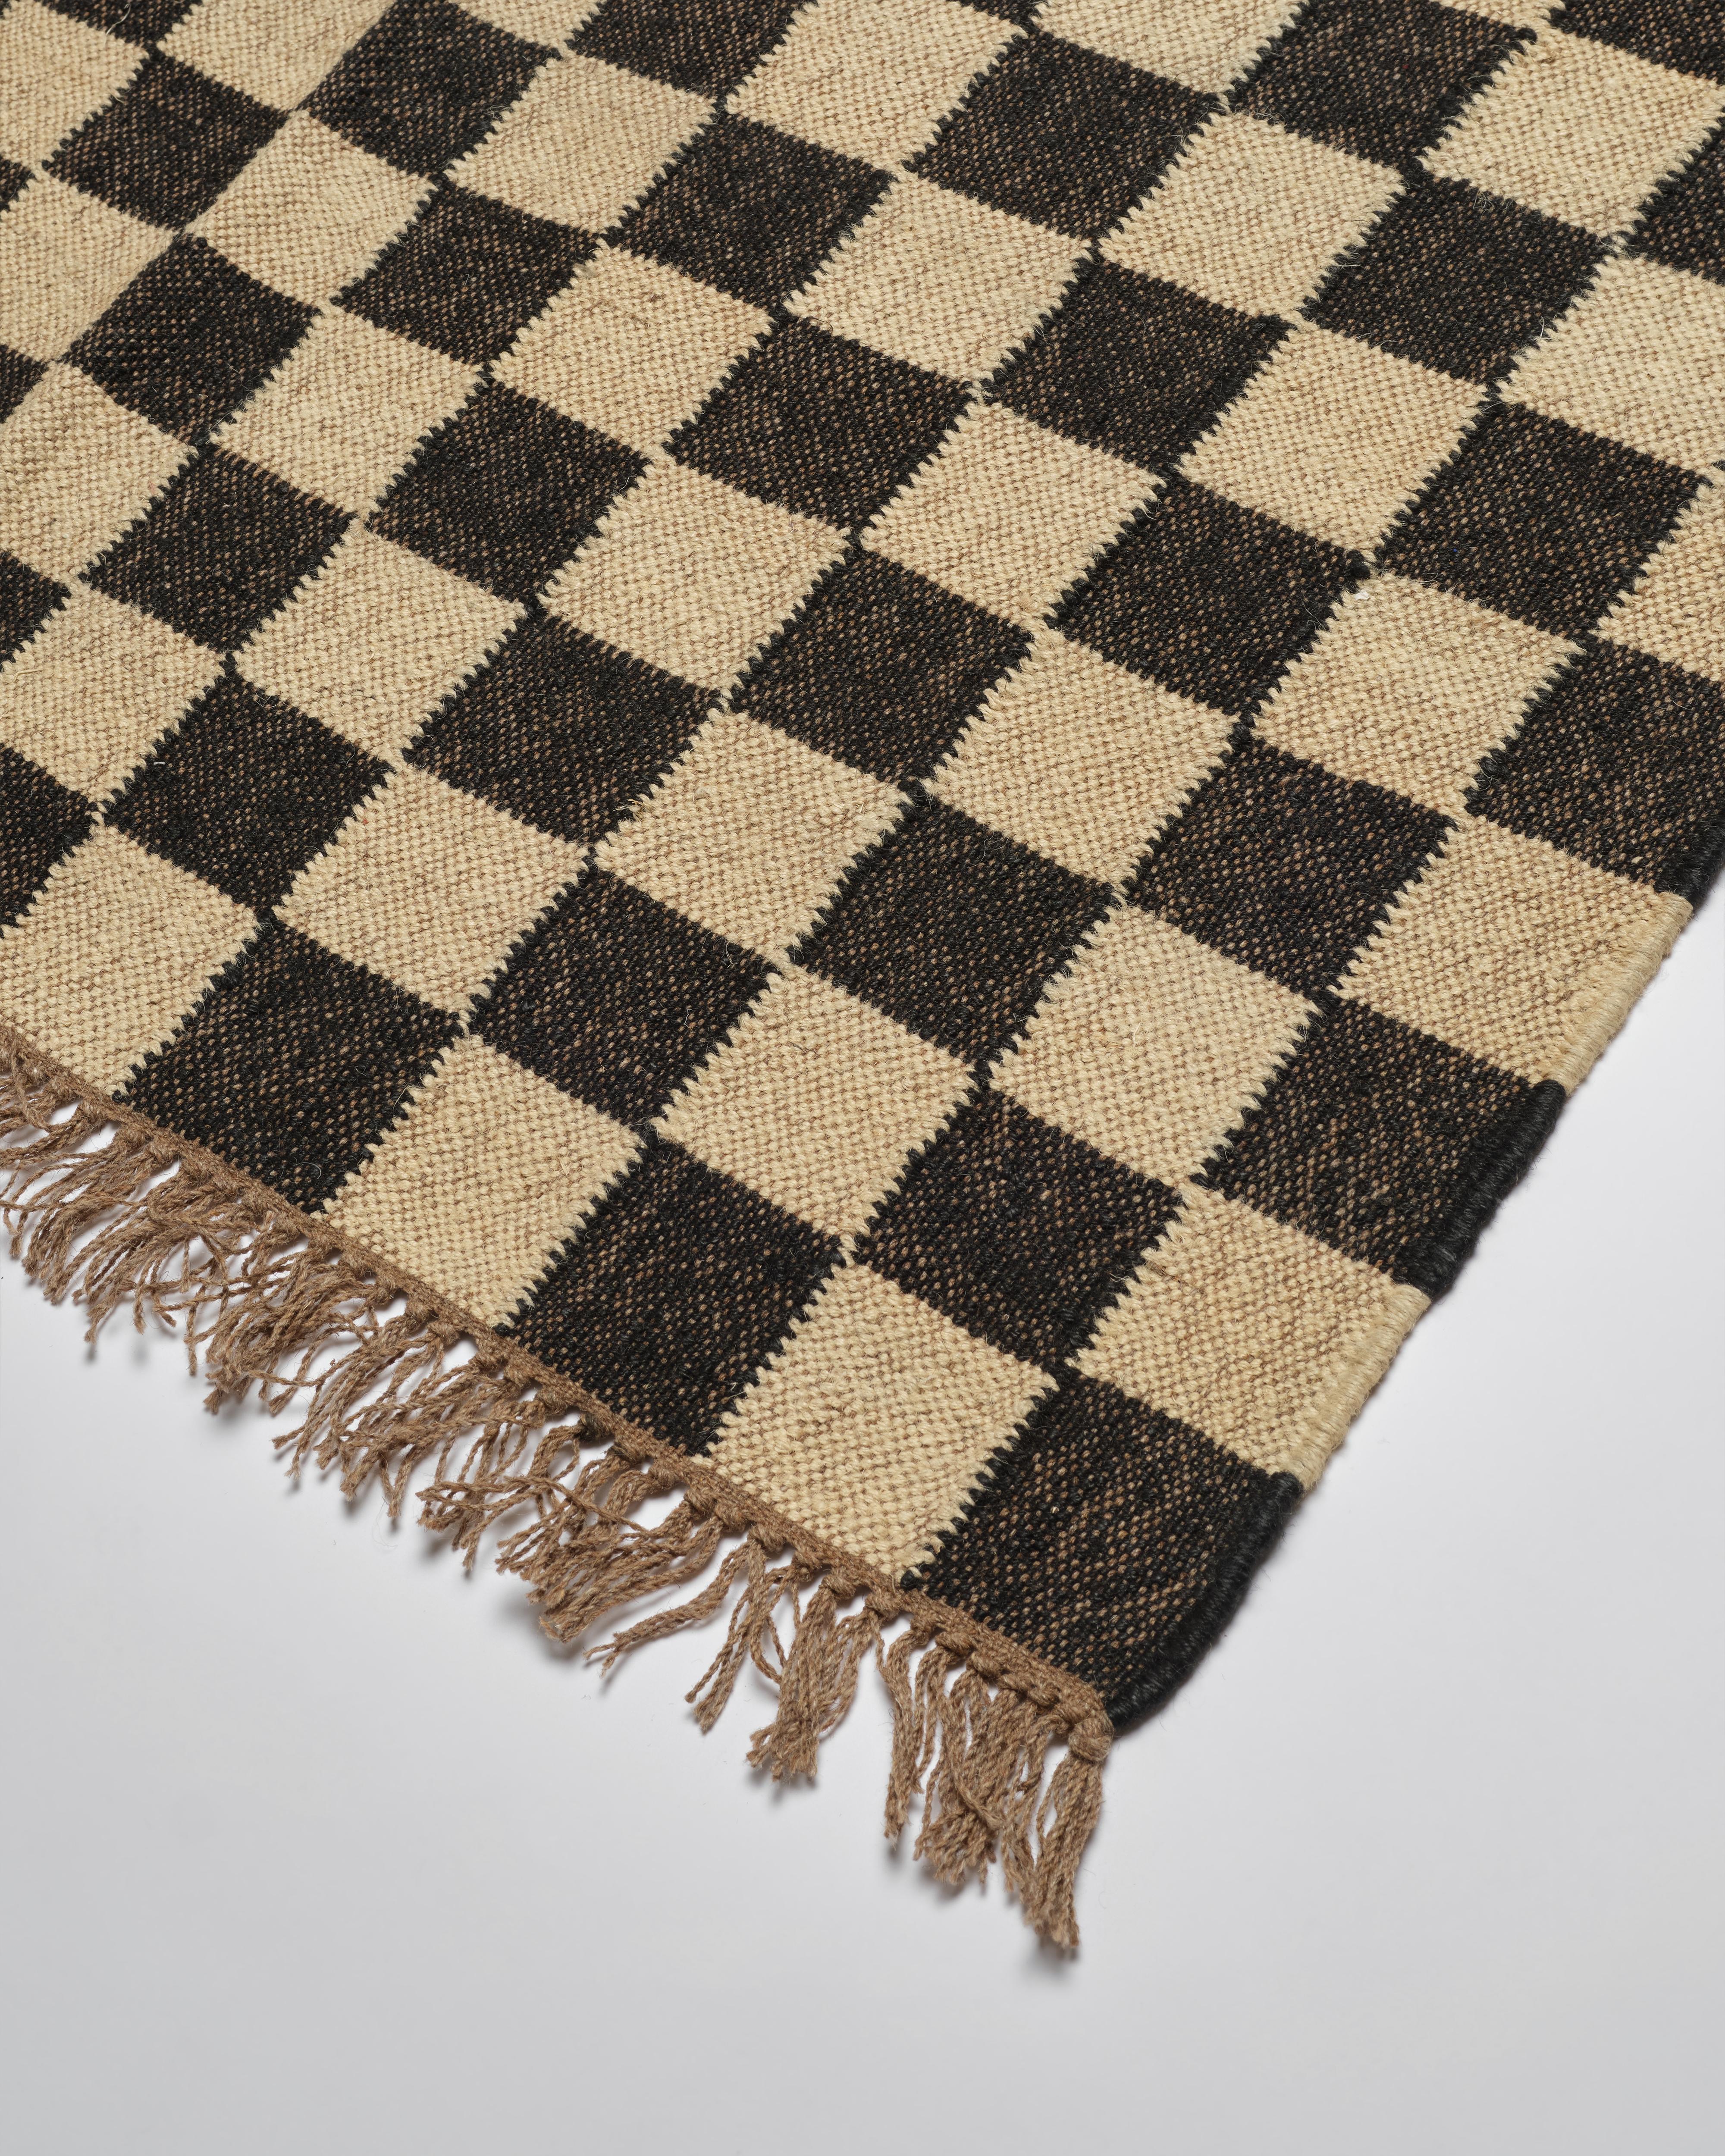 The Forsyth search for the coolest checkerboard rug is over. Our beautiful wool and jute checkerboard rugs are expertly handwoven in Jaipur, India. The checkerboard pattern and neutral off black & natural coloring are chic and sophisticated with a